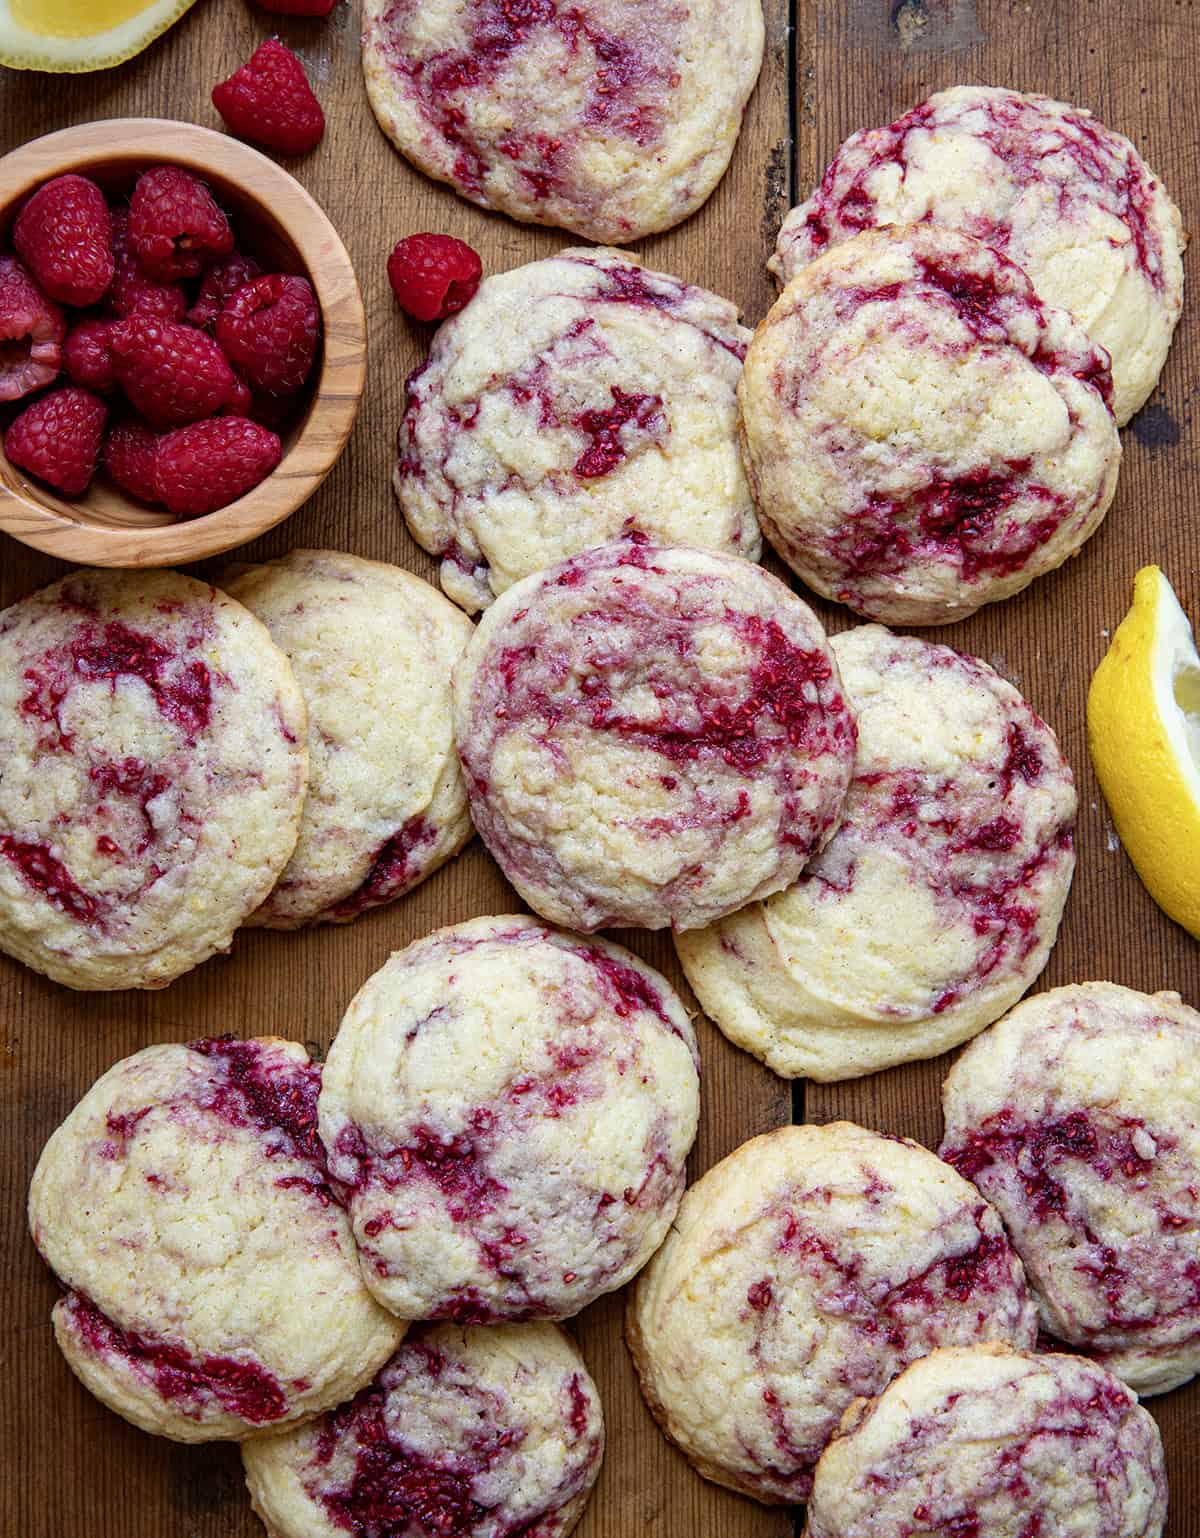 Lemon Raspberry Cookies with fresh raspberry and lemon wedges on a wooden table from overhead.